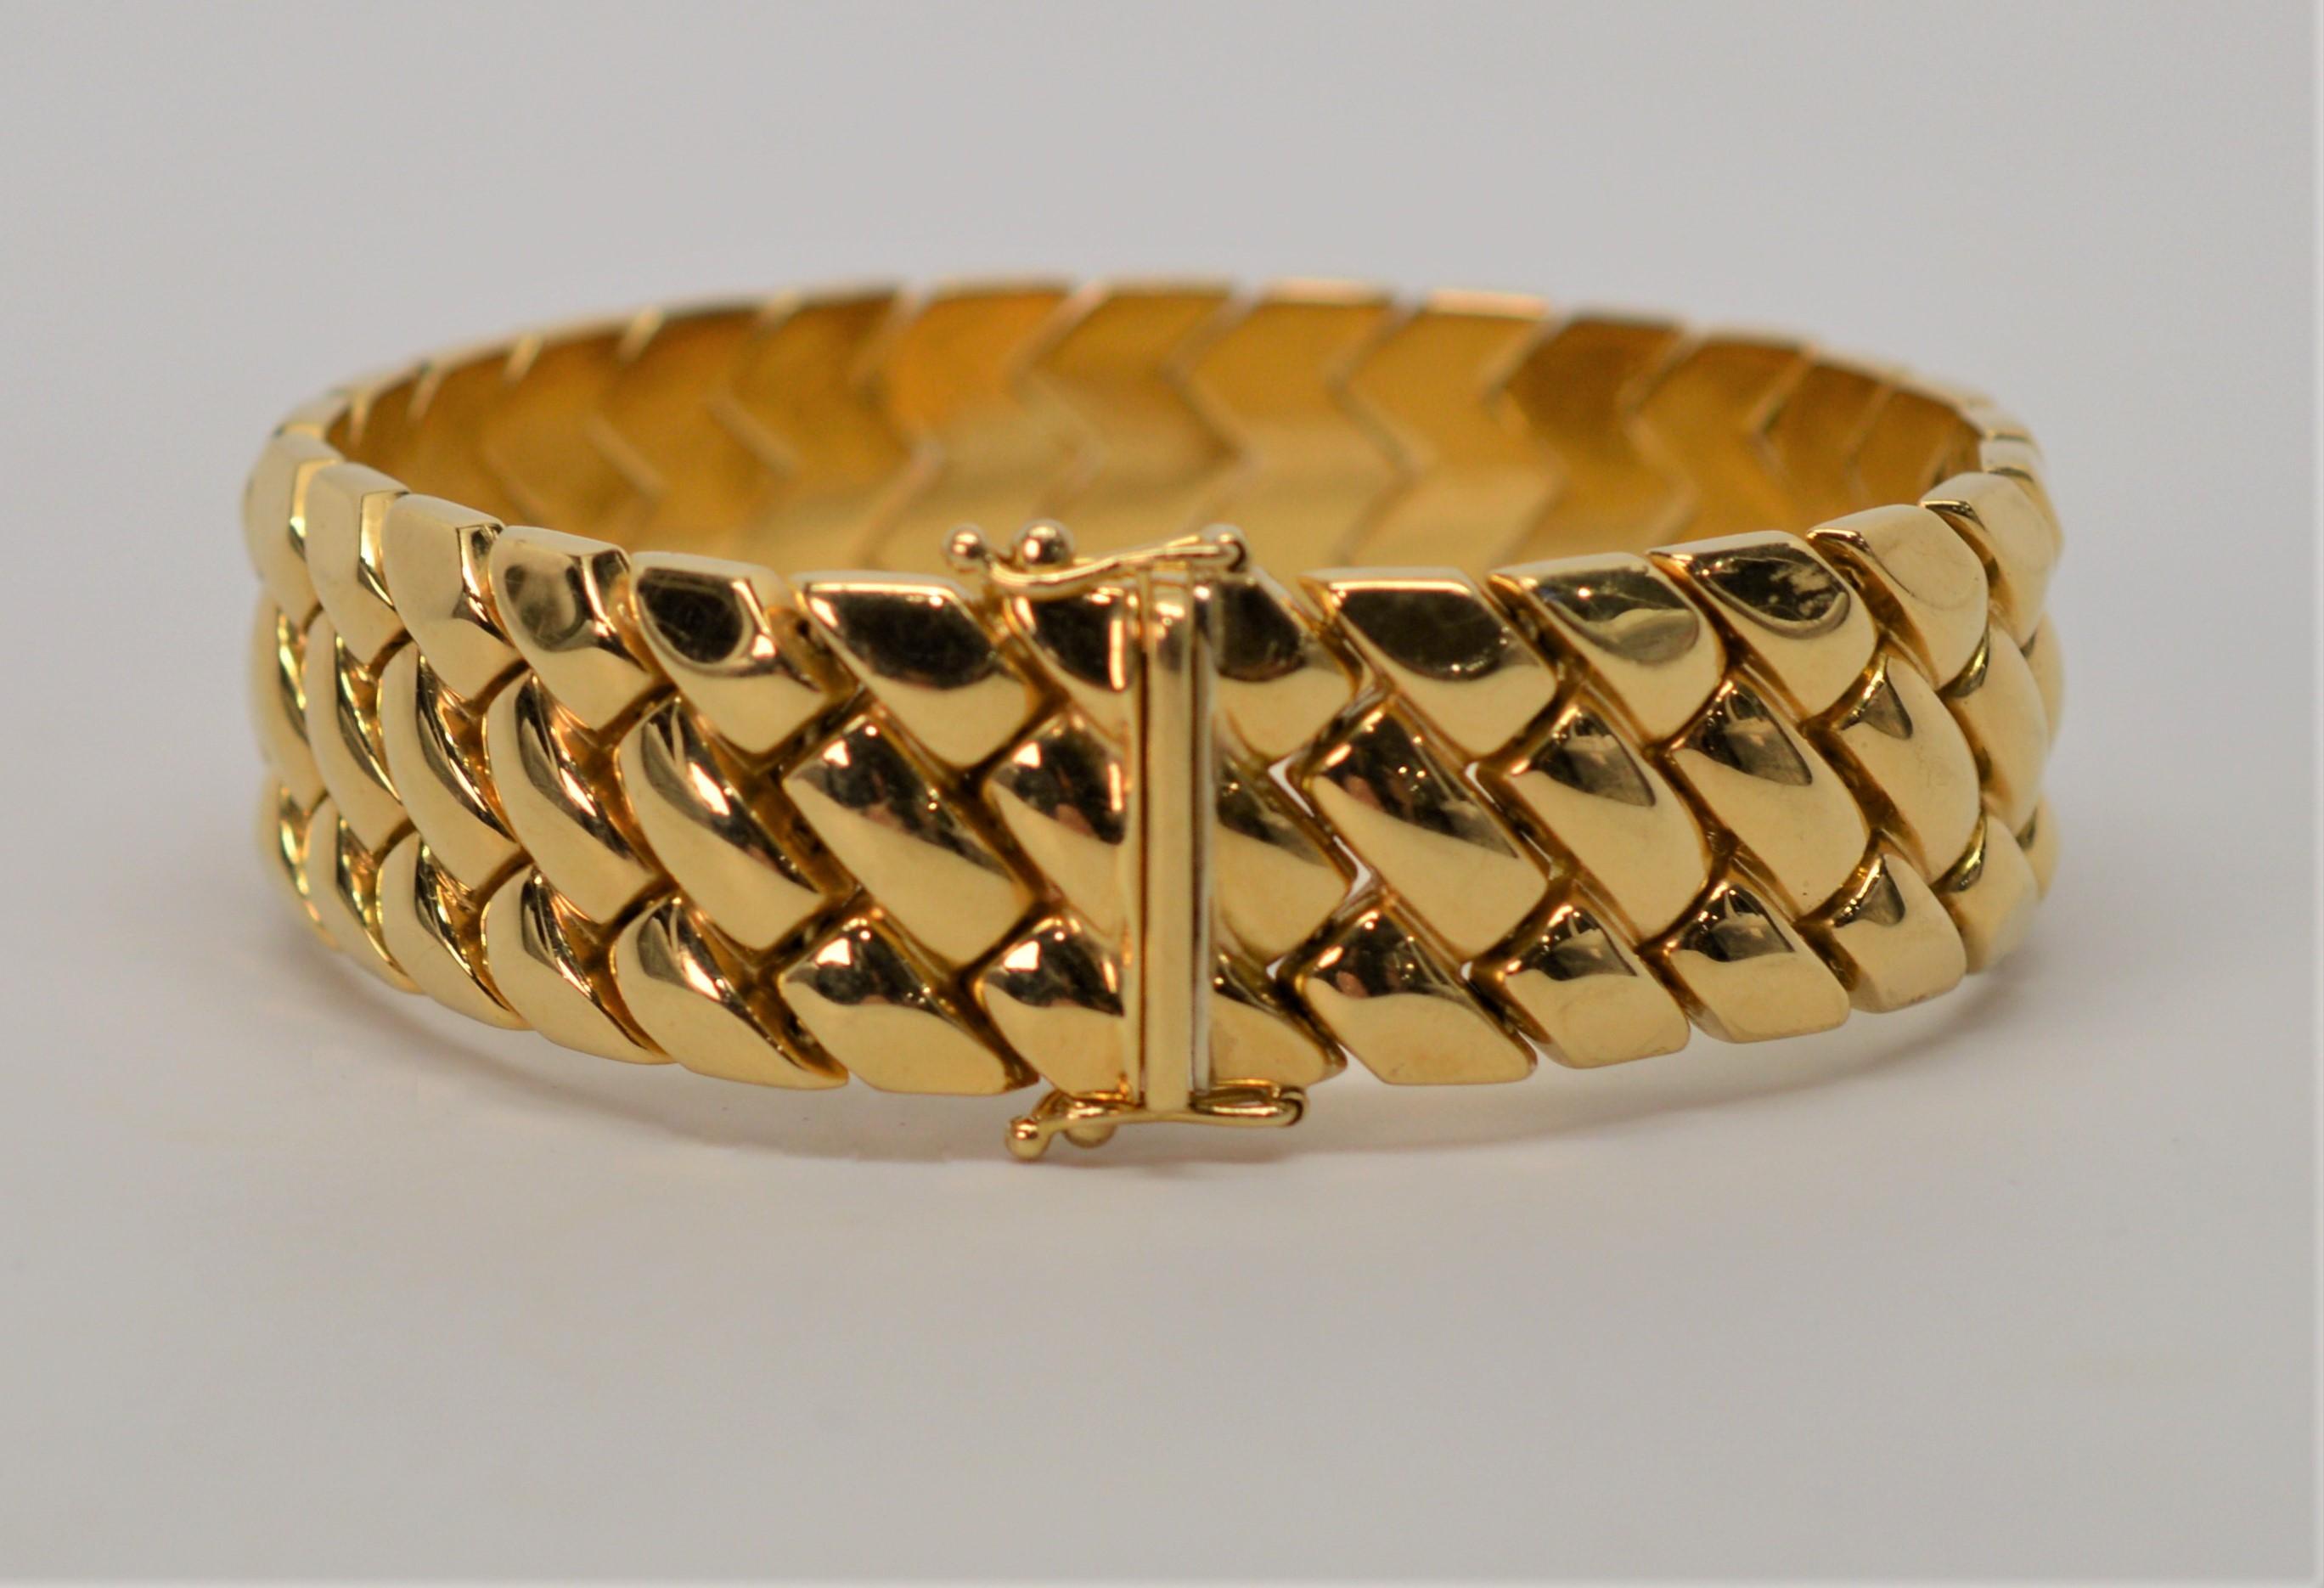 A bright, bold classic band of beautiful eighteen karat 18K yellow gold for every occasion. Excellent quality Italian construction at seven inches in length and 5/8 inch wide, the braided or weave style links give dimension and interest to the high